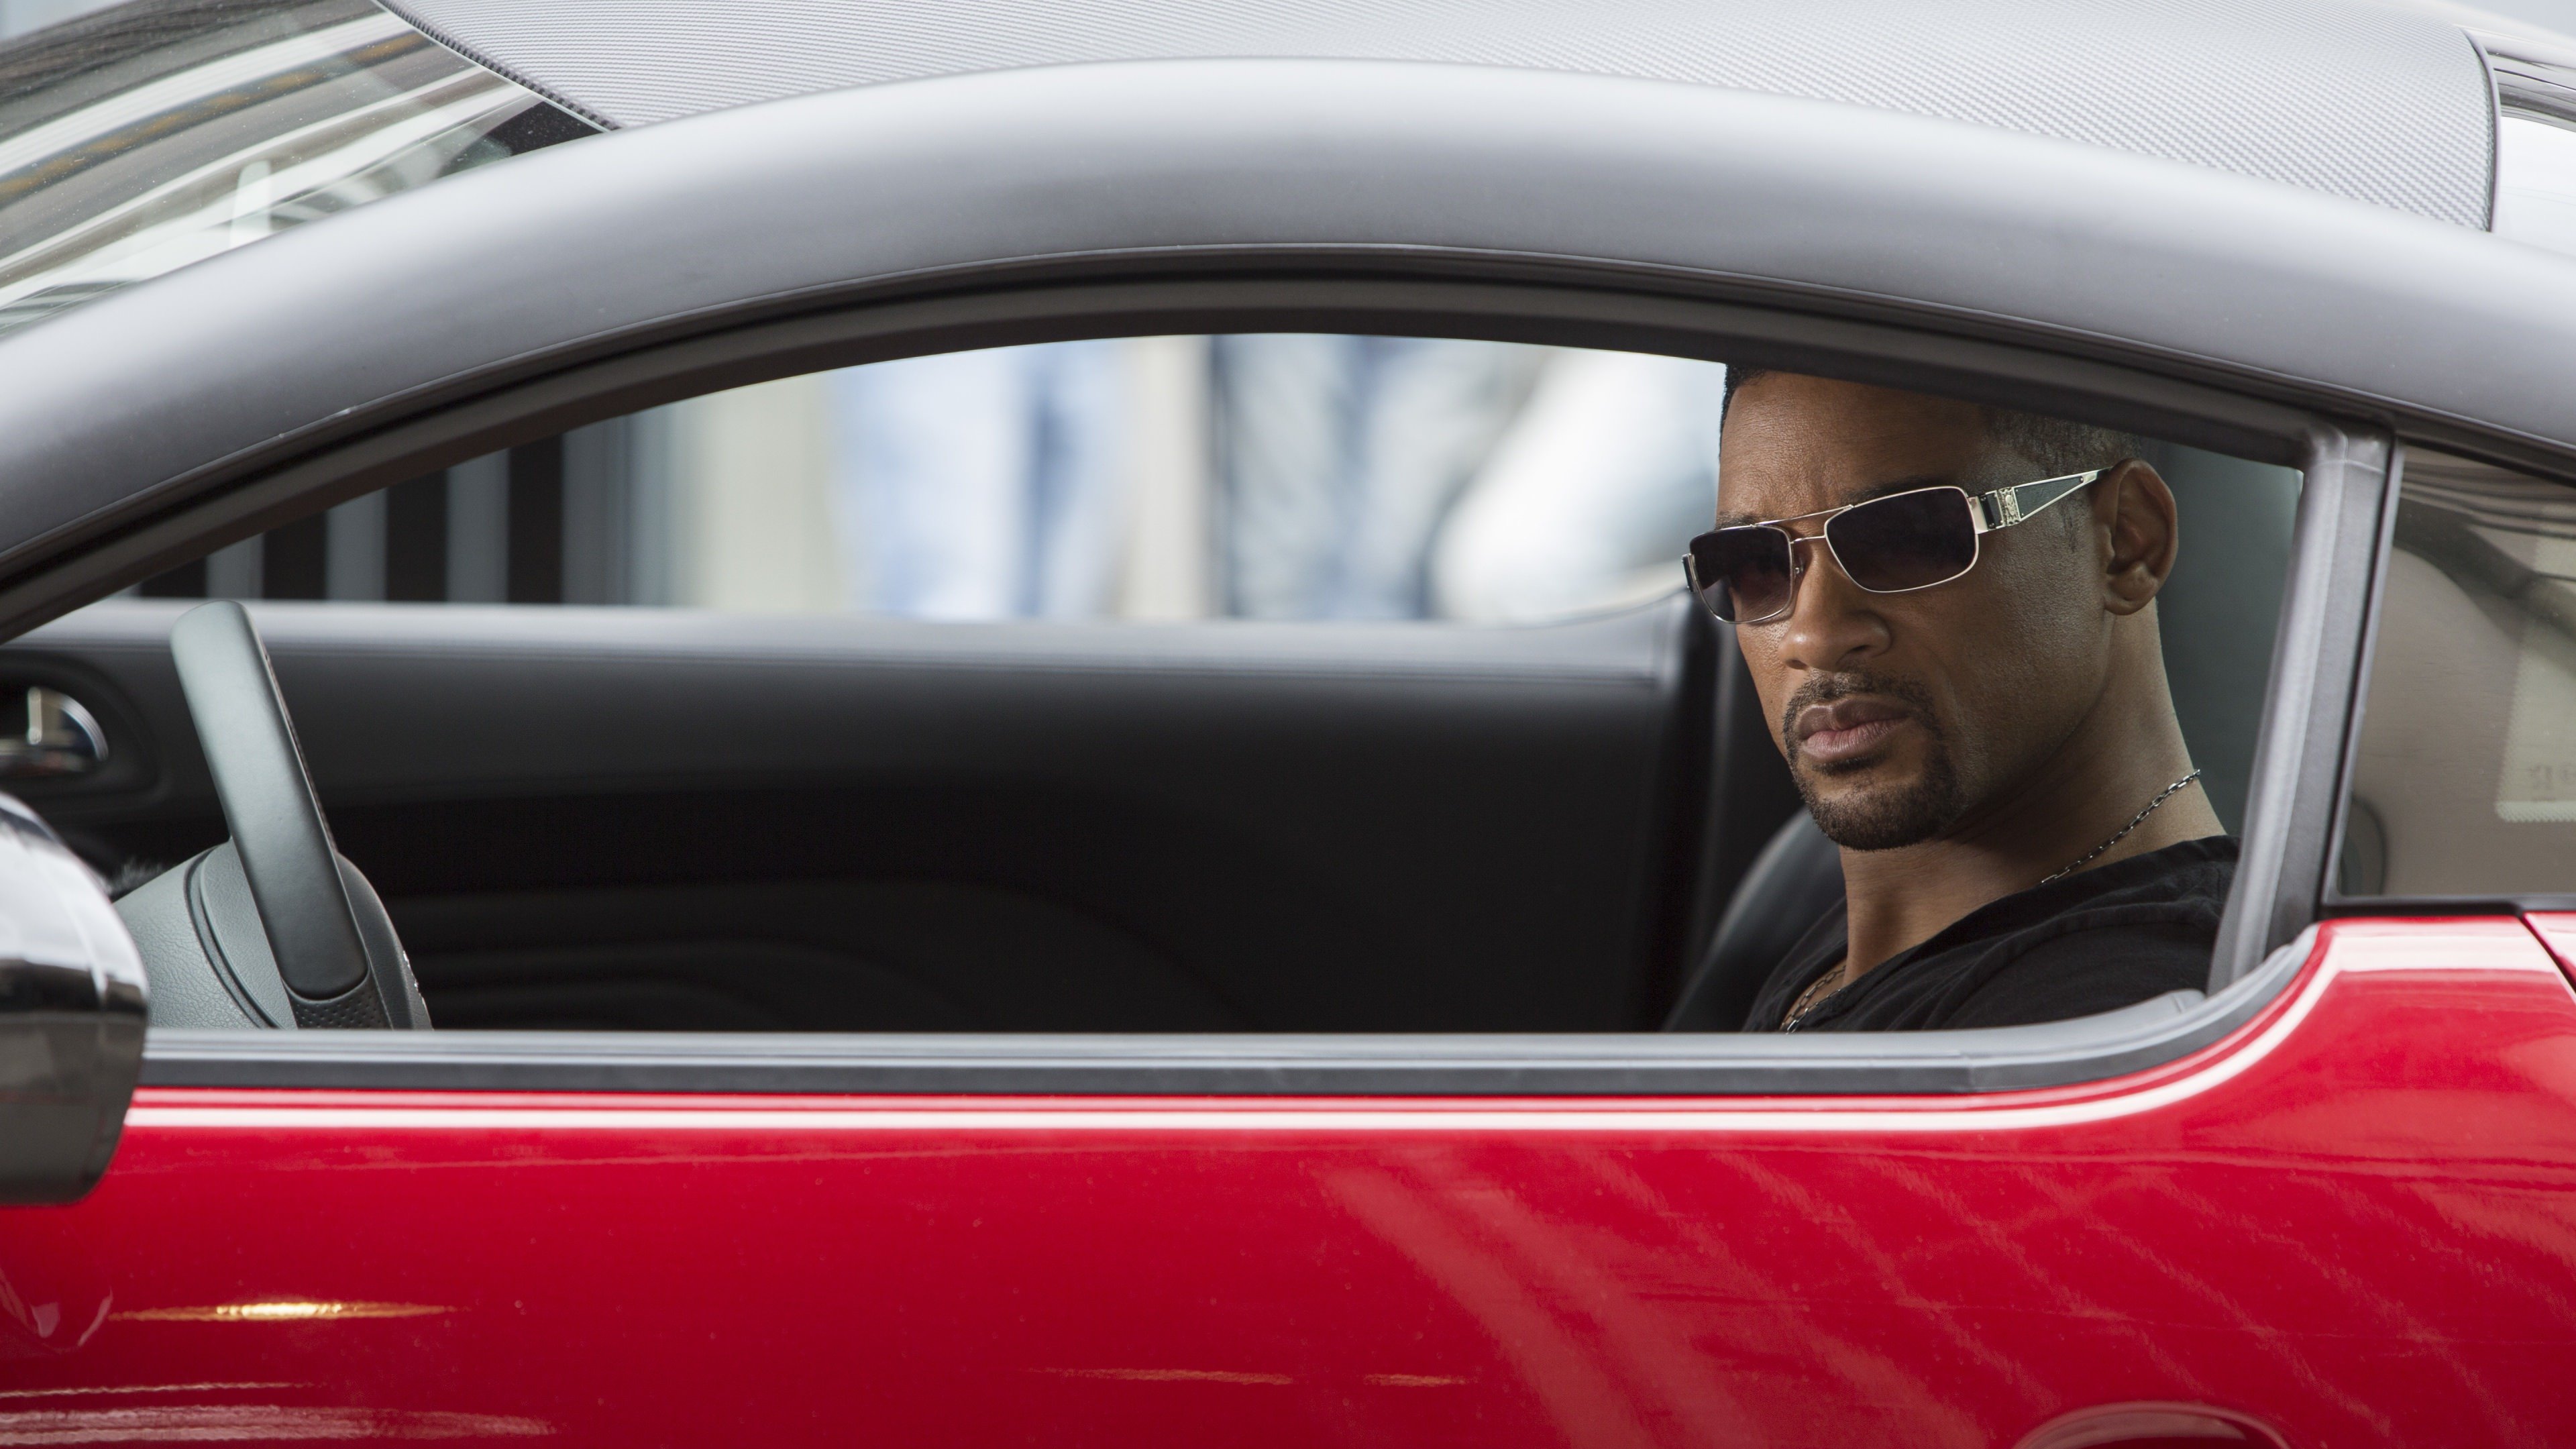 Will Smith at the shooting of "Focus" Wallpaper for Desktop 4K 3840x2160